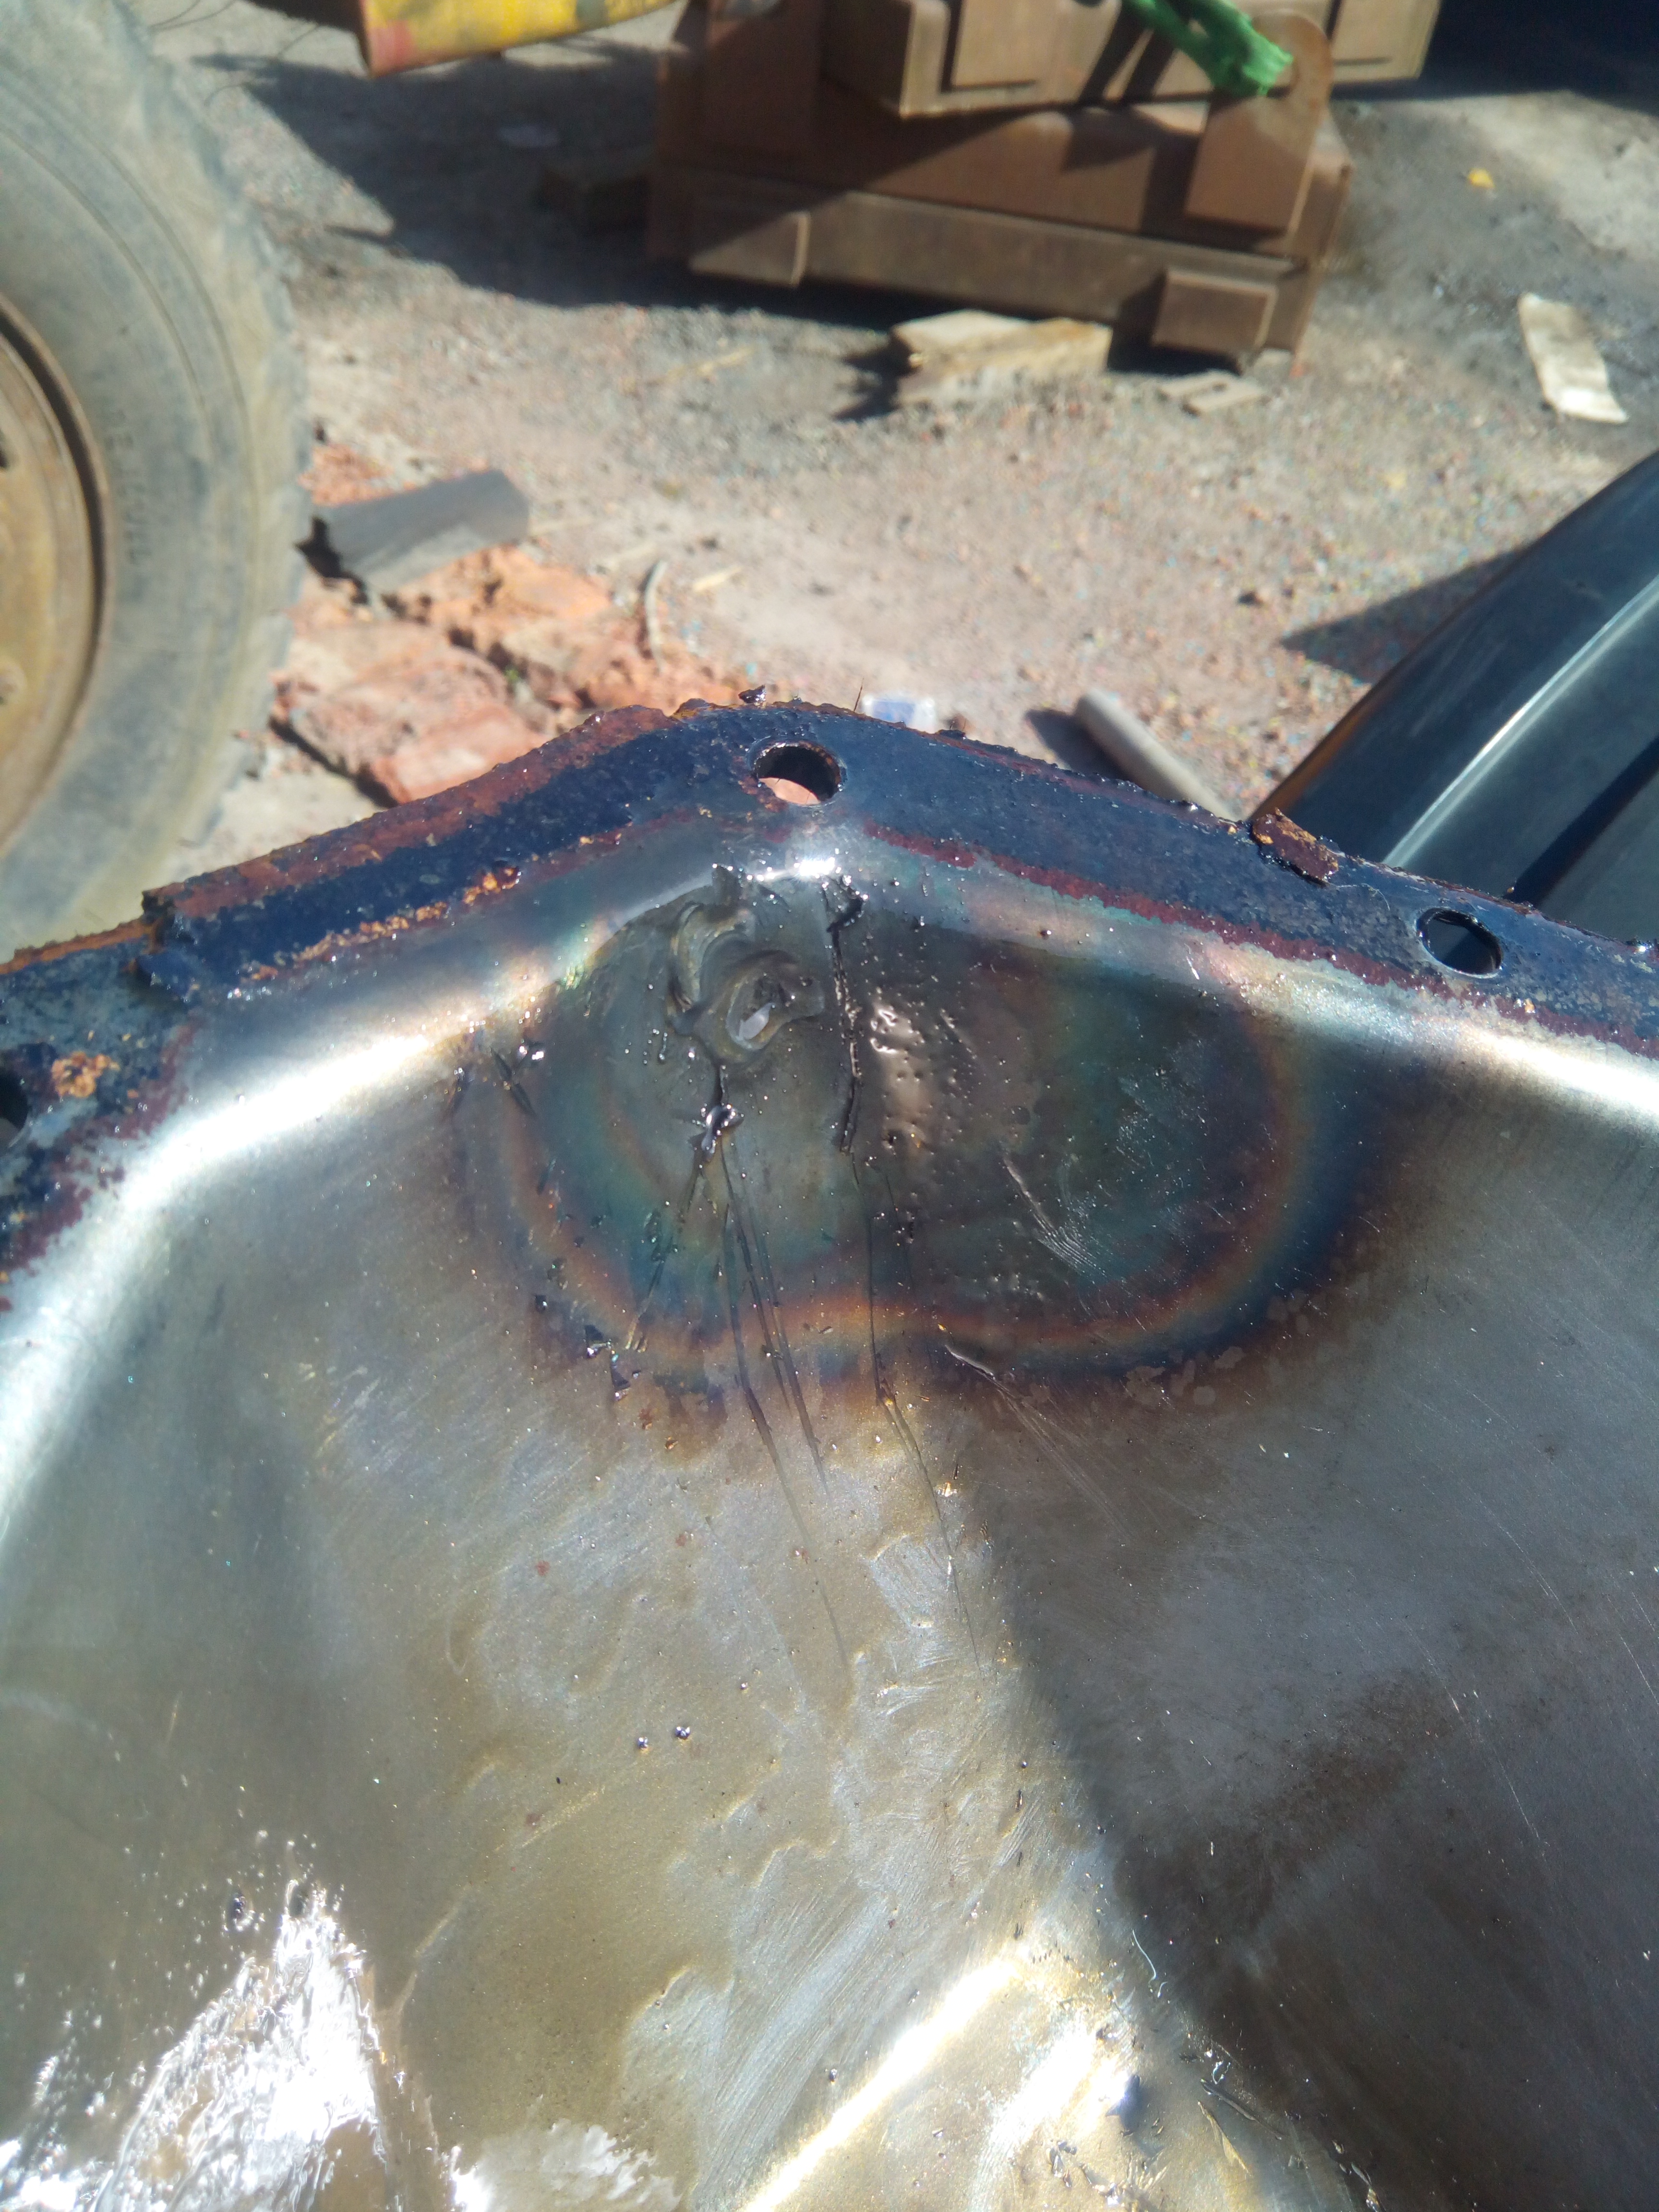 Inside of the diff cover, showing a corner that has previously
been welded to repair a hole; with a distinctive weld-puddle shape,
and a rainbow of heat-affected metal surrounding it.